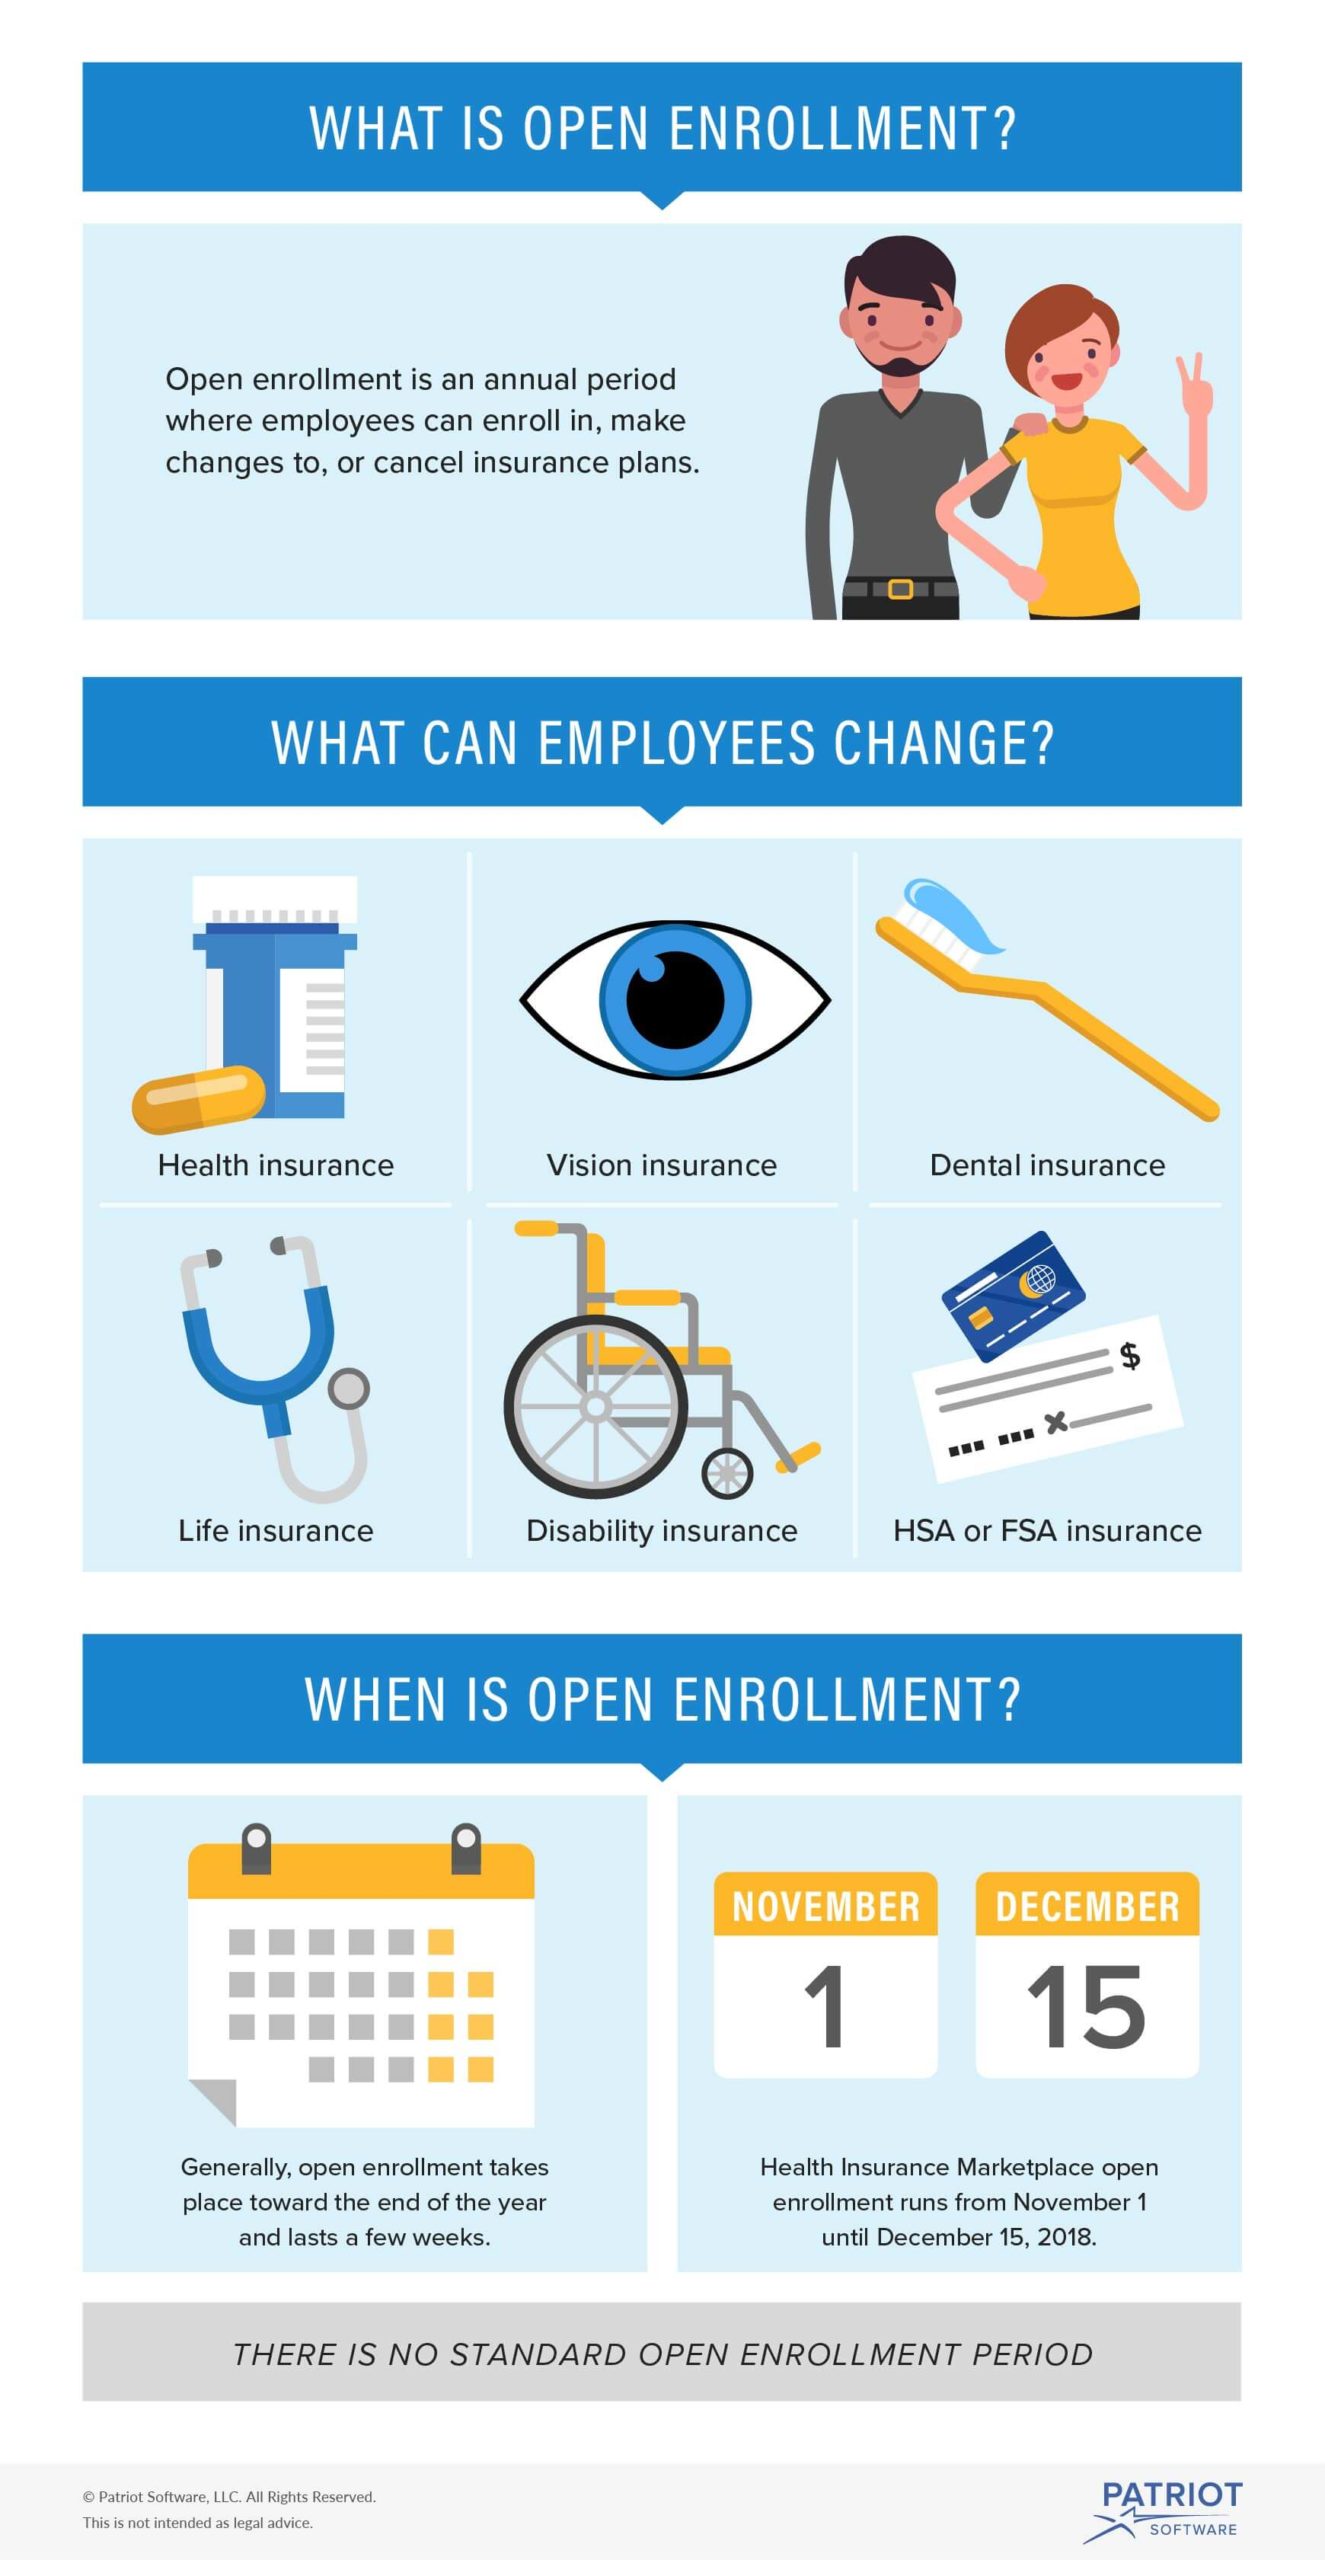 What Is Open Enrollment?